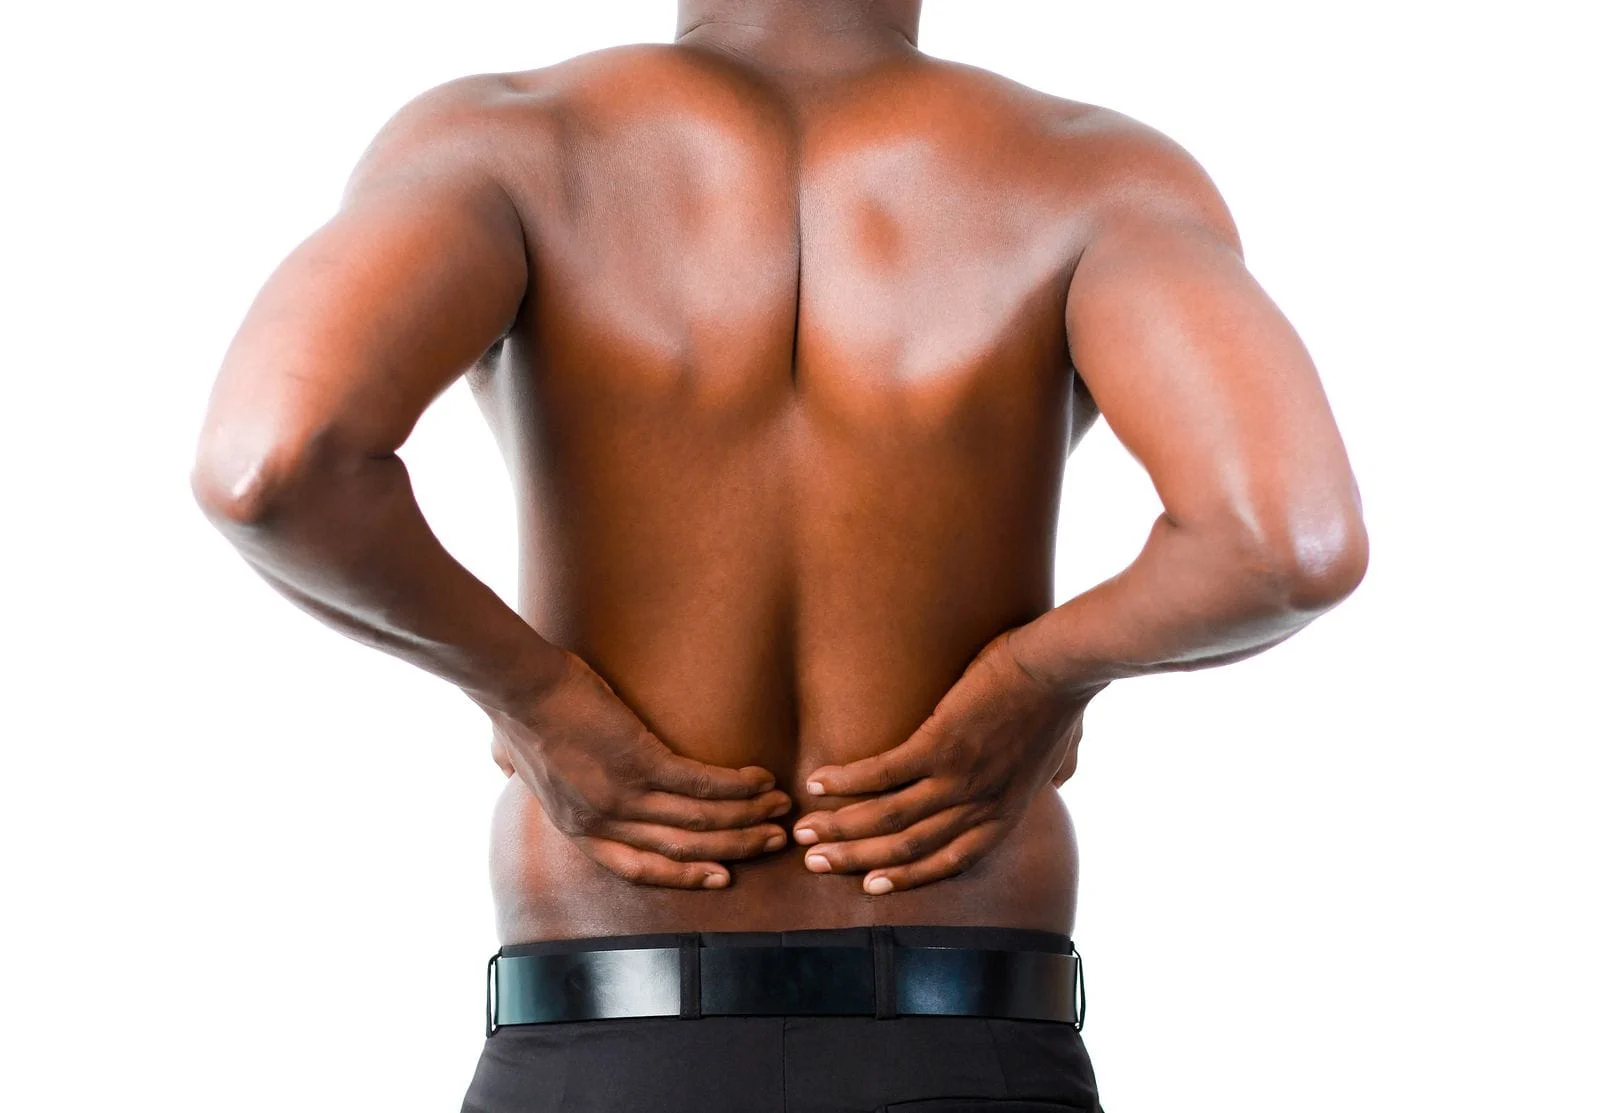 Lower back pain in jacksonville, fl treated by chiropractor at integrated healthcare solutions 